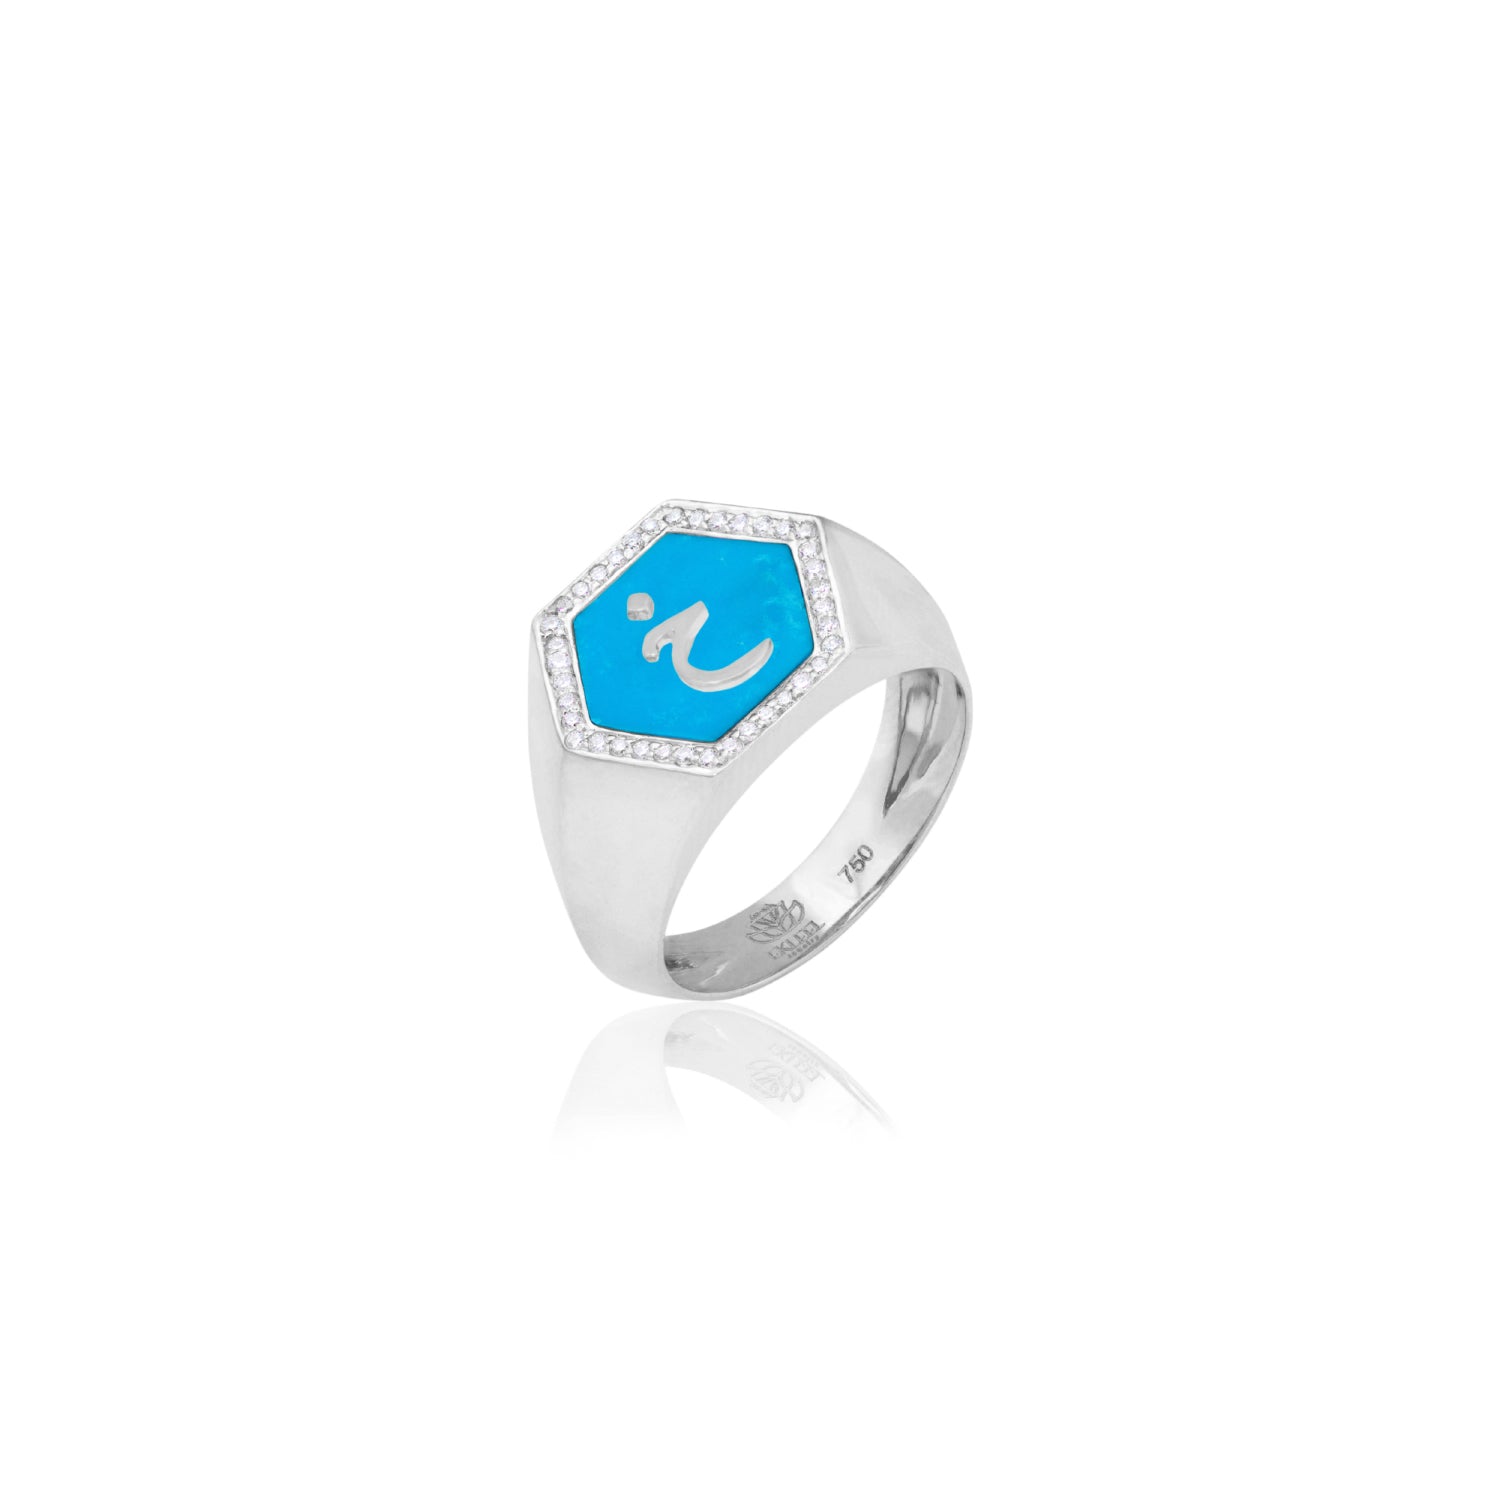 Qamoos 2.0 Letter خ Turquoise and Diamond Signet Ring in White Gold